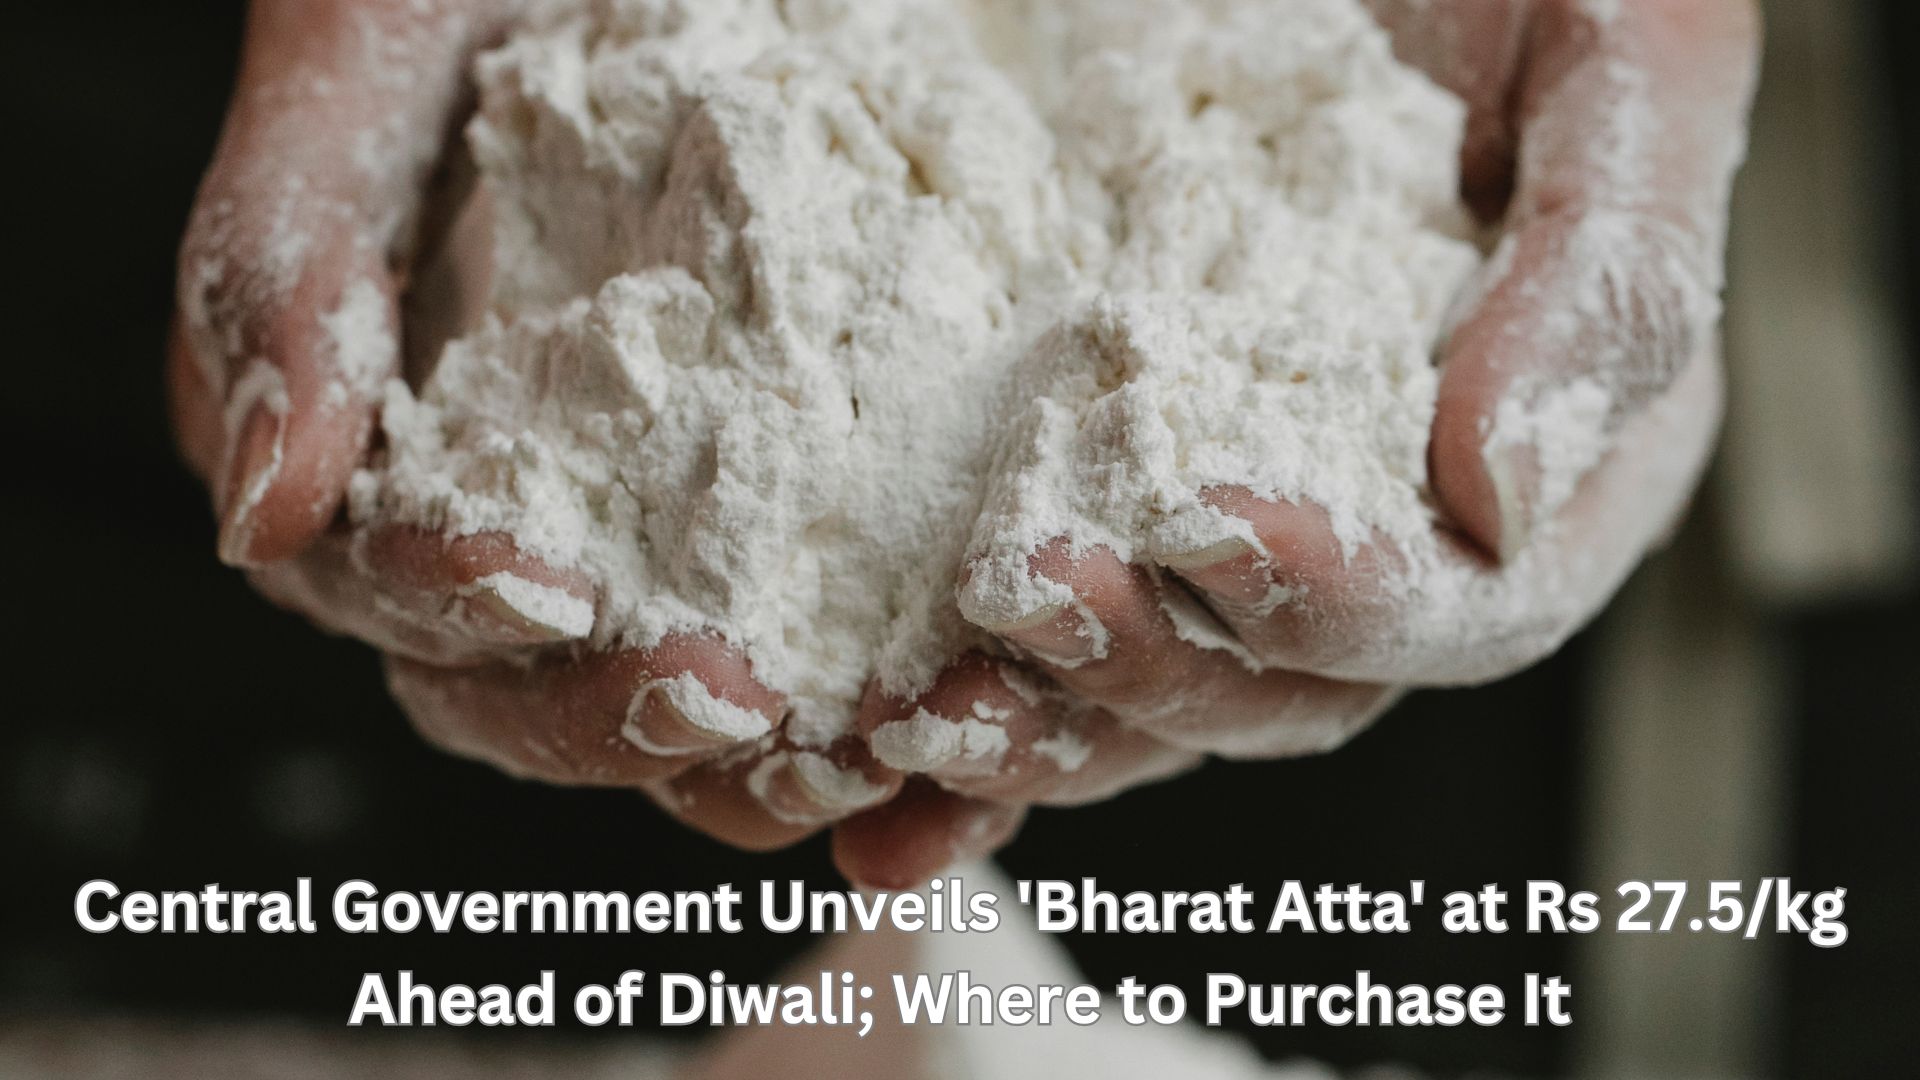 Central Government Unveils 'Bharat Atta' at Rs 27.5/kg Ahead of Diwali; Where to Purchase It